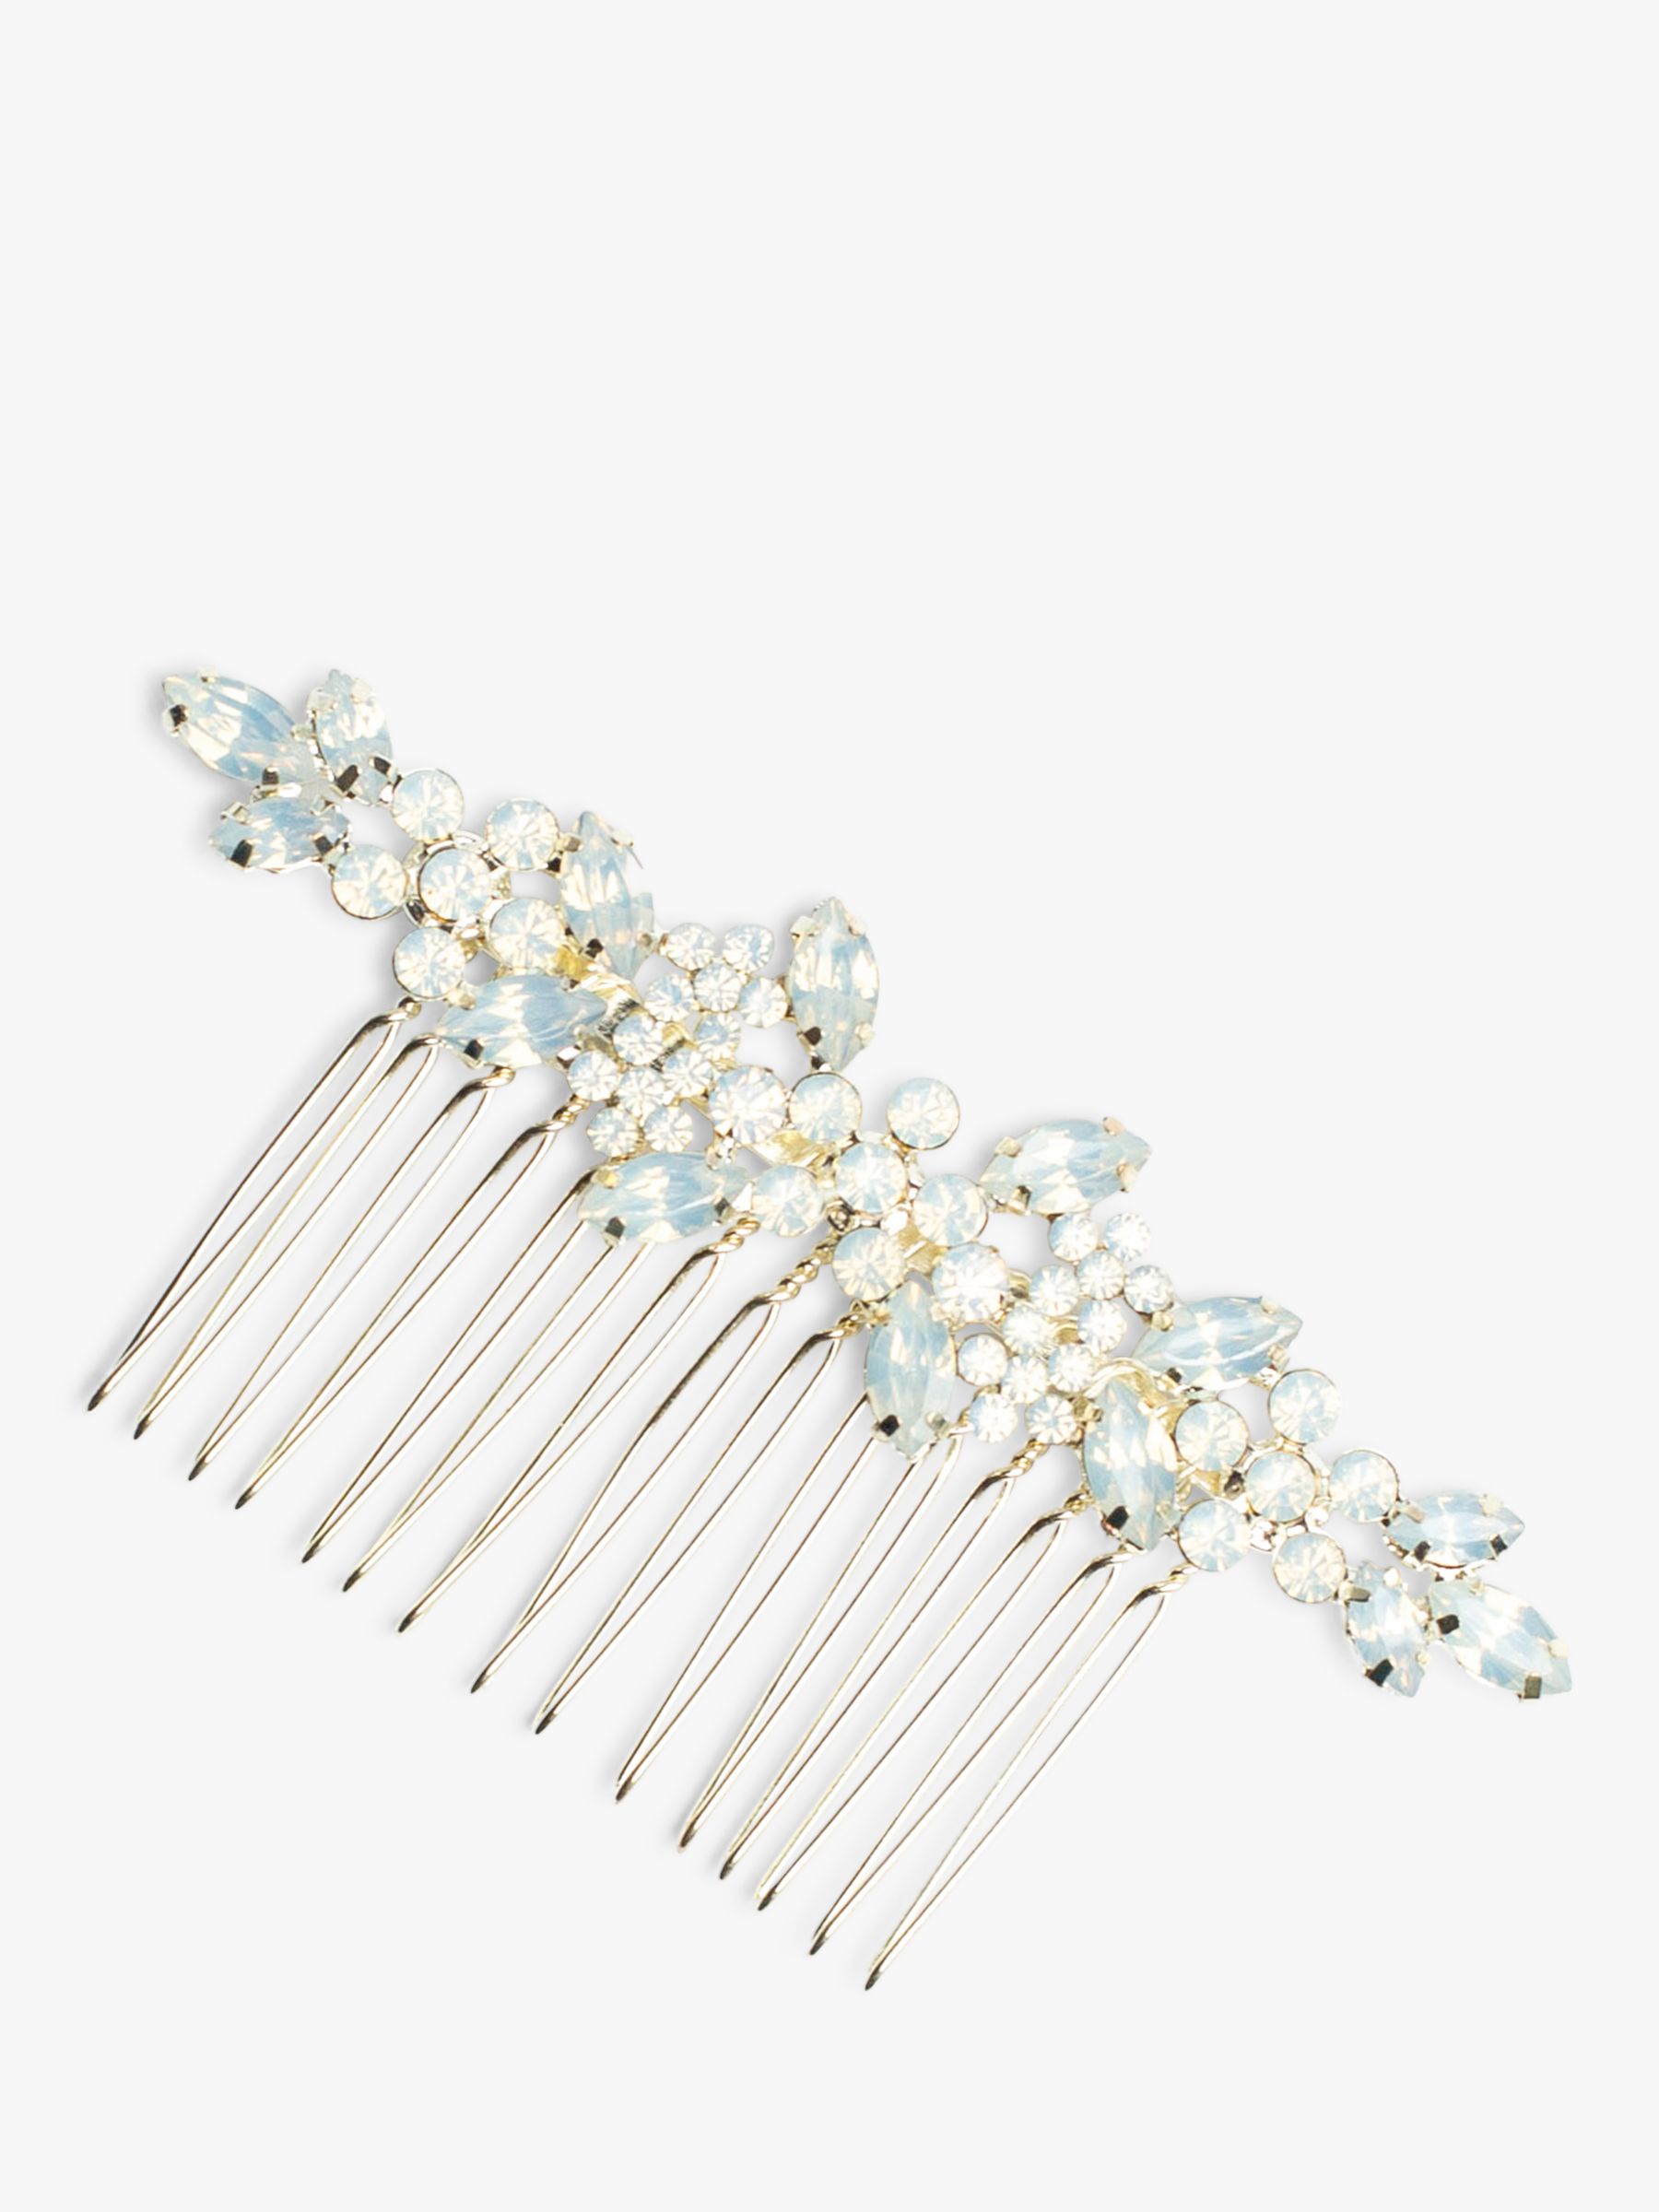 Bloom & Bay Pansy Frosted Stone Hair Comb Grip, Gold/Blue, One Size